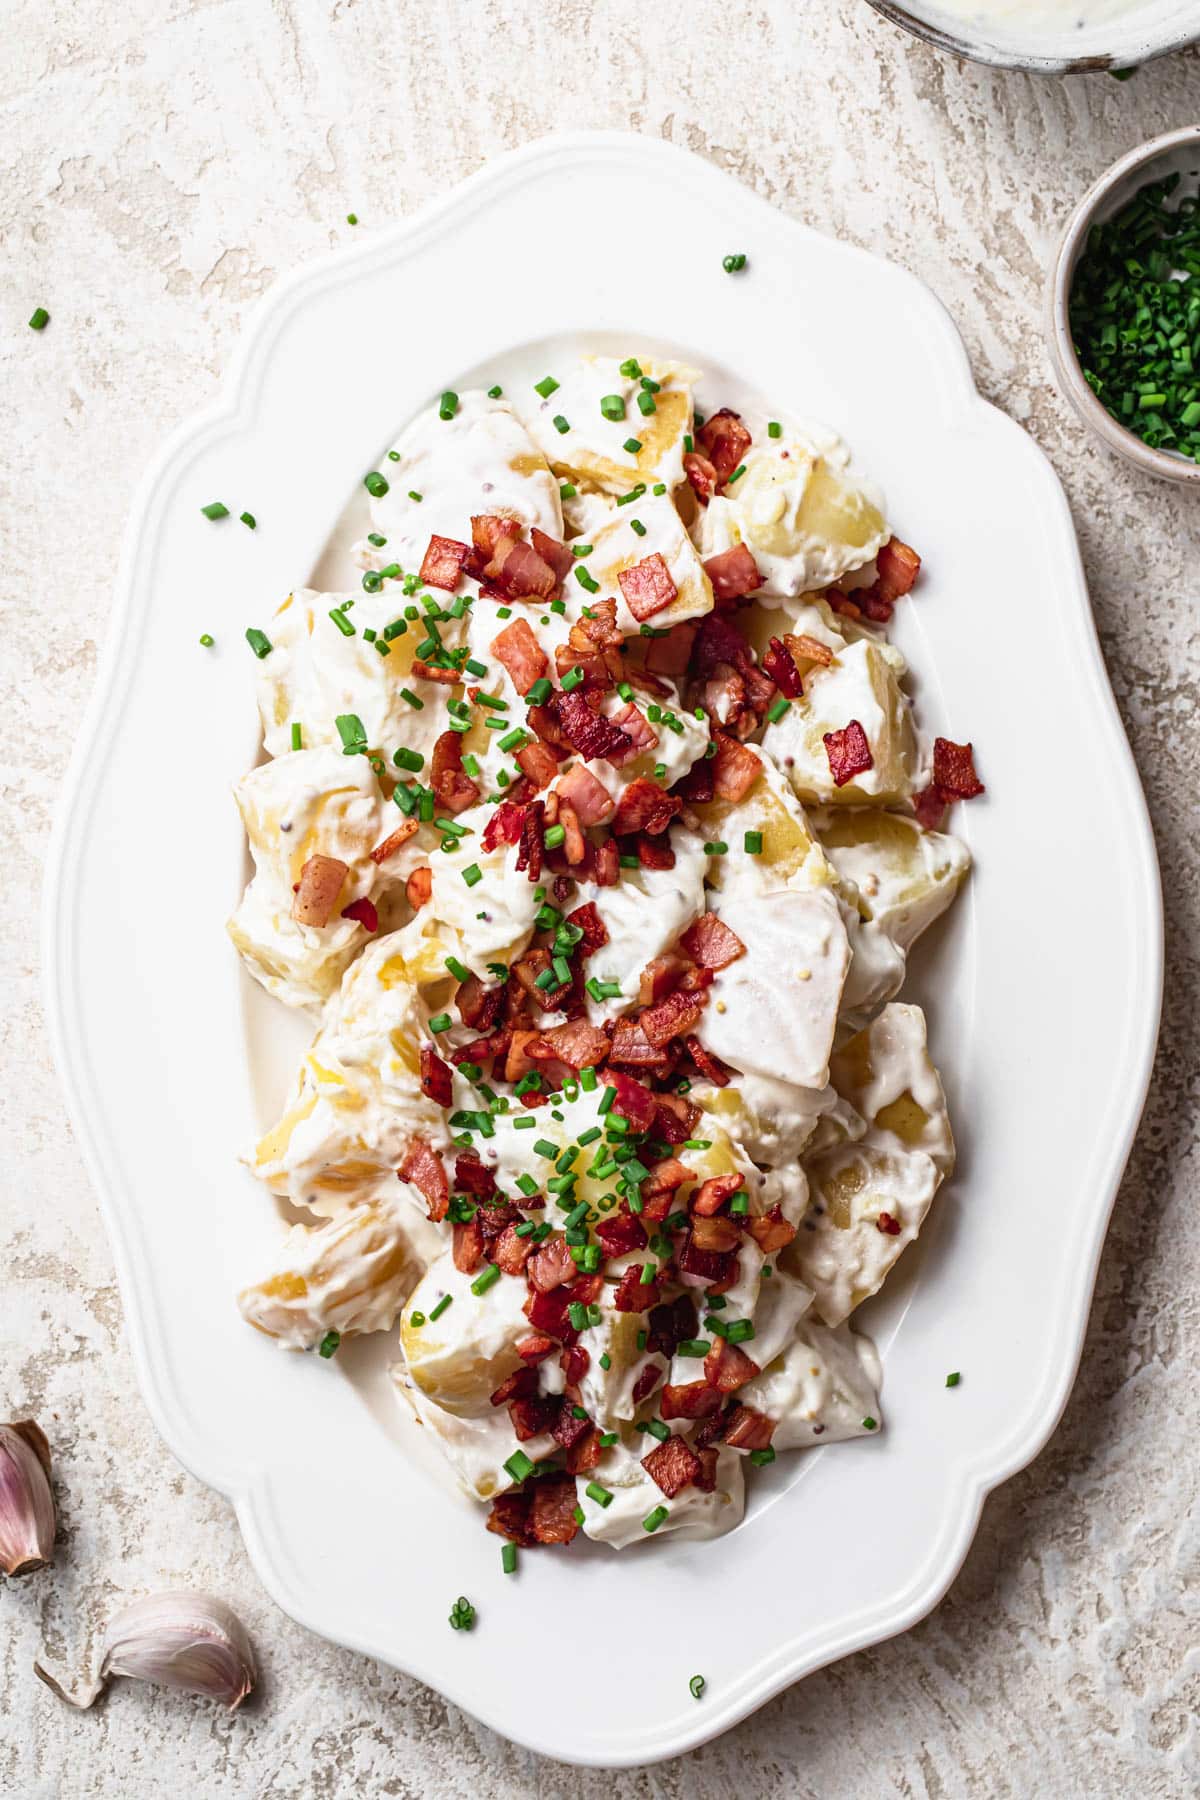 Creamy potato salad served on a white platter, topped with crispy bacon bits and finely sliced chives.